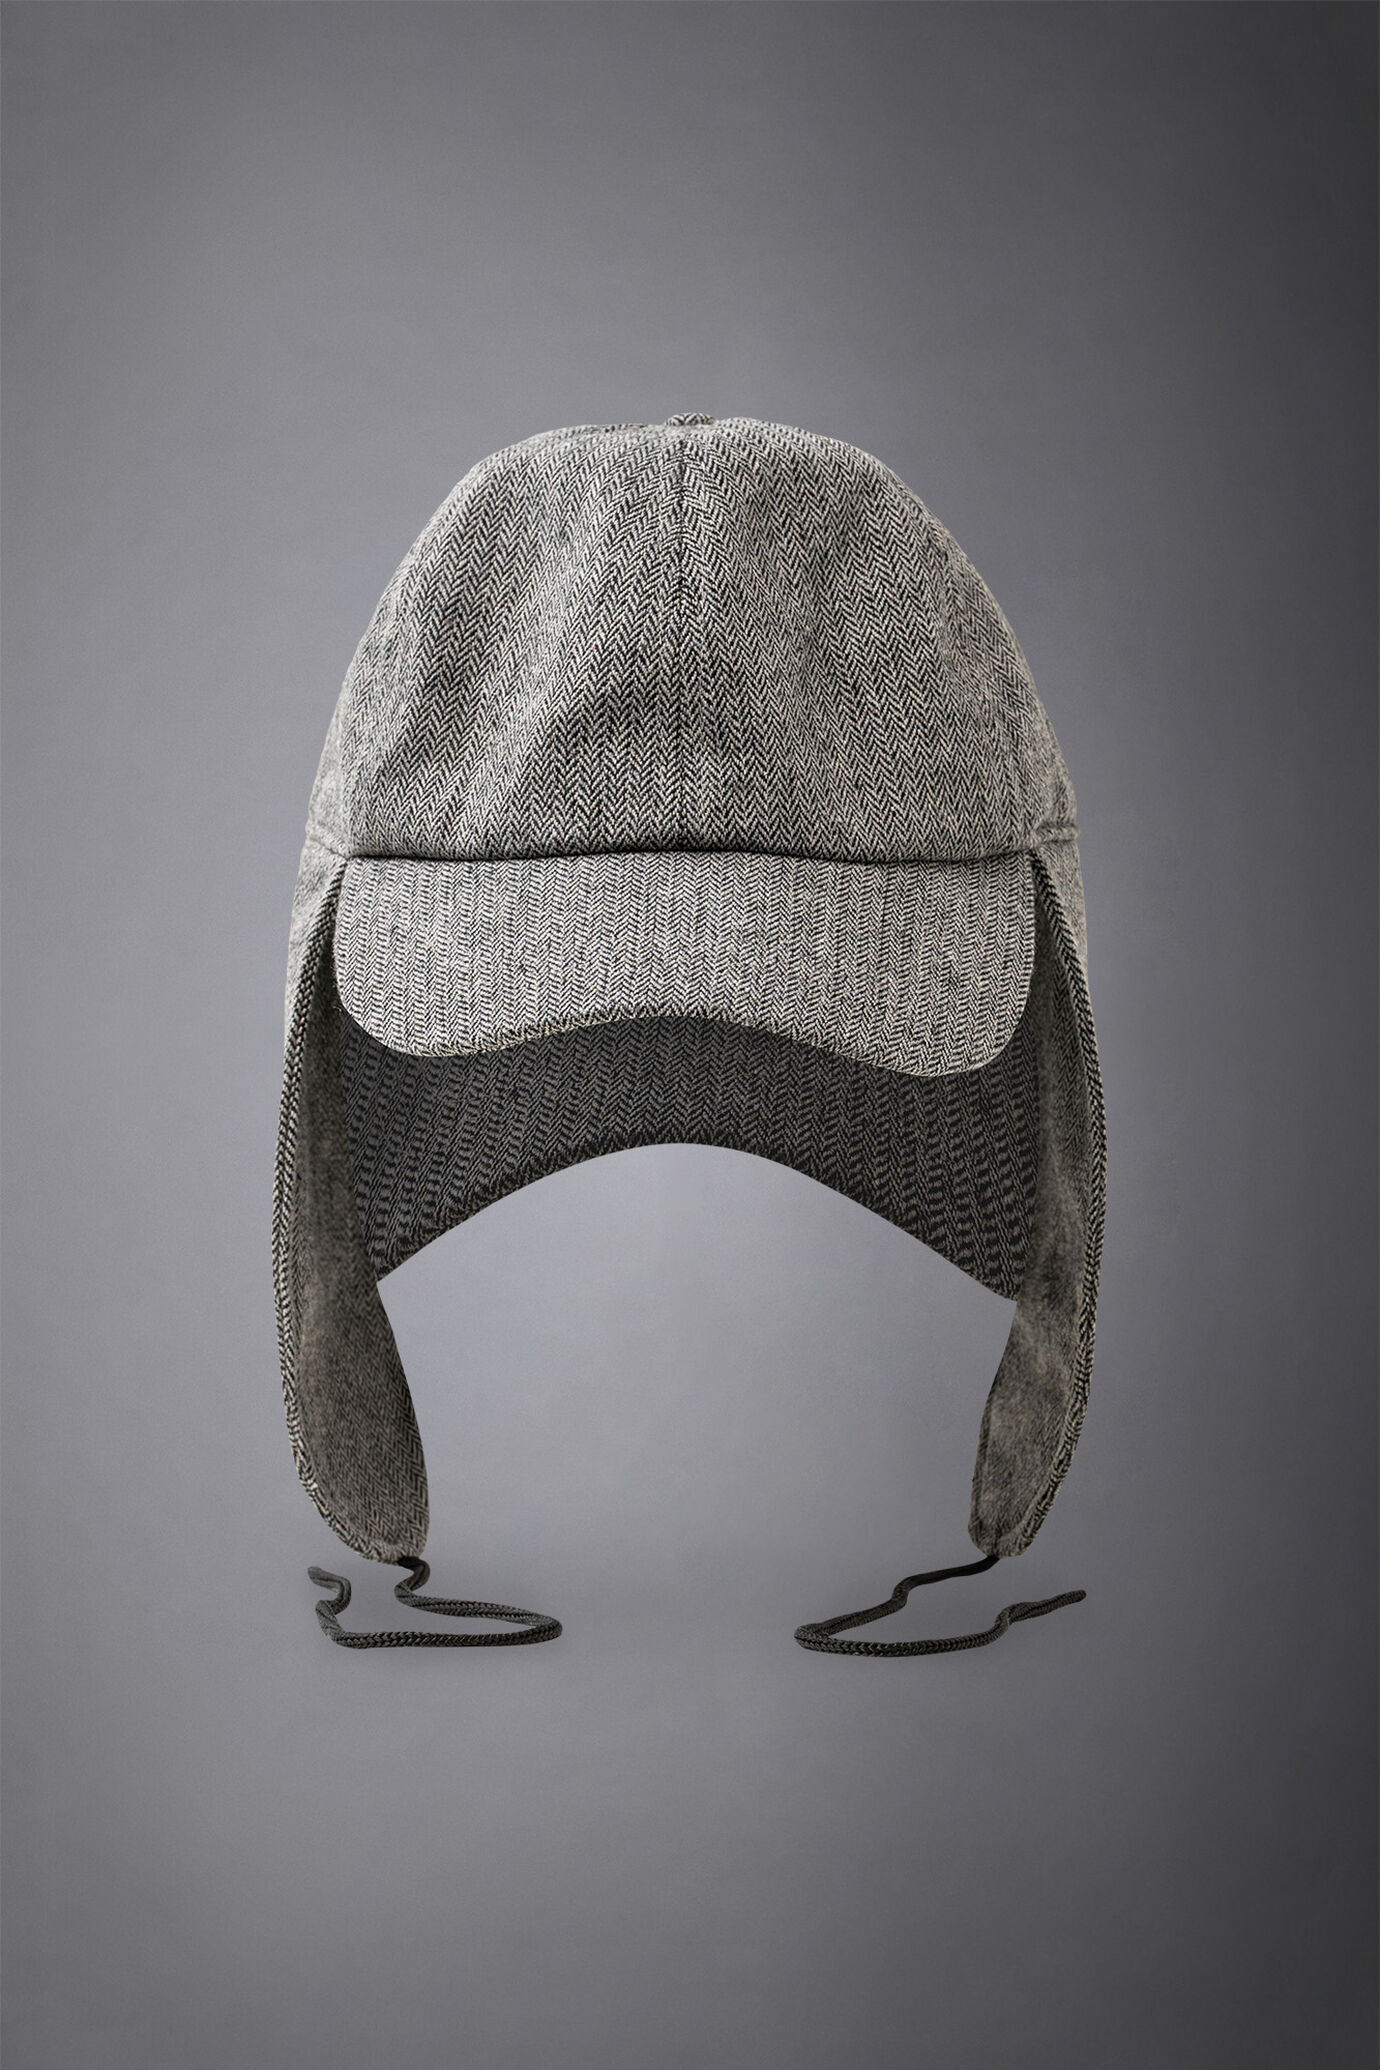 Women's wool-blend hat with visor and earmuffs